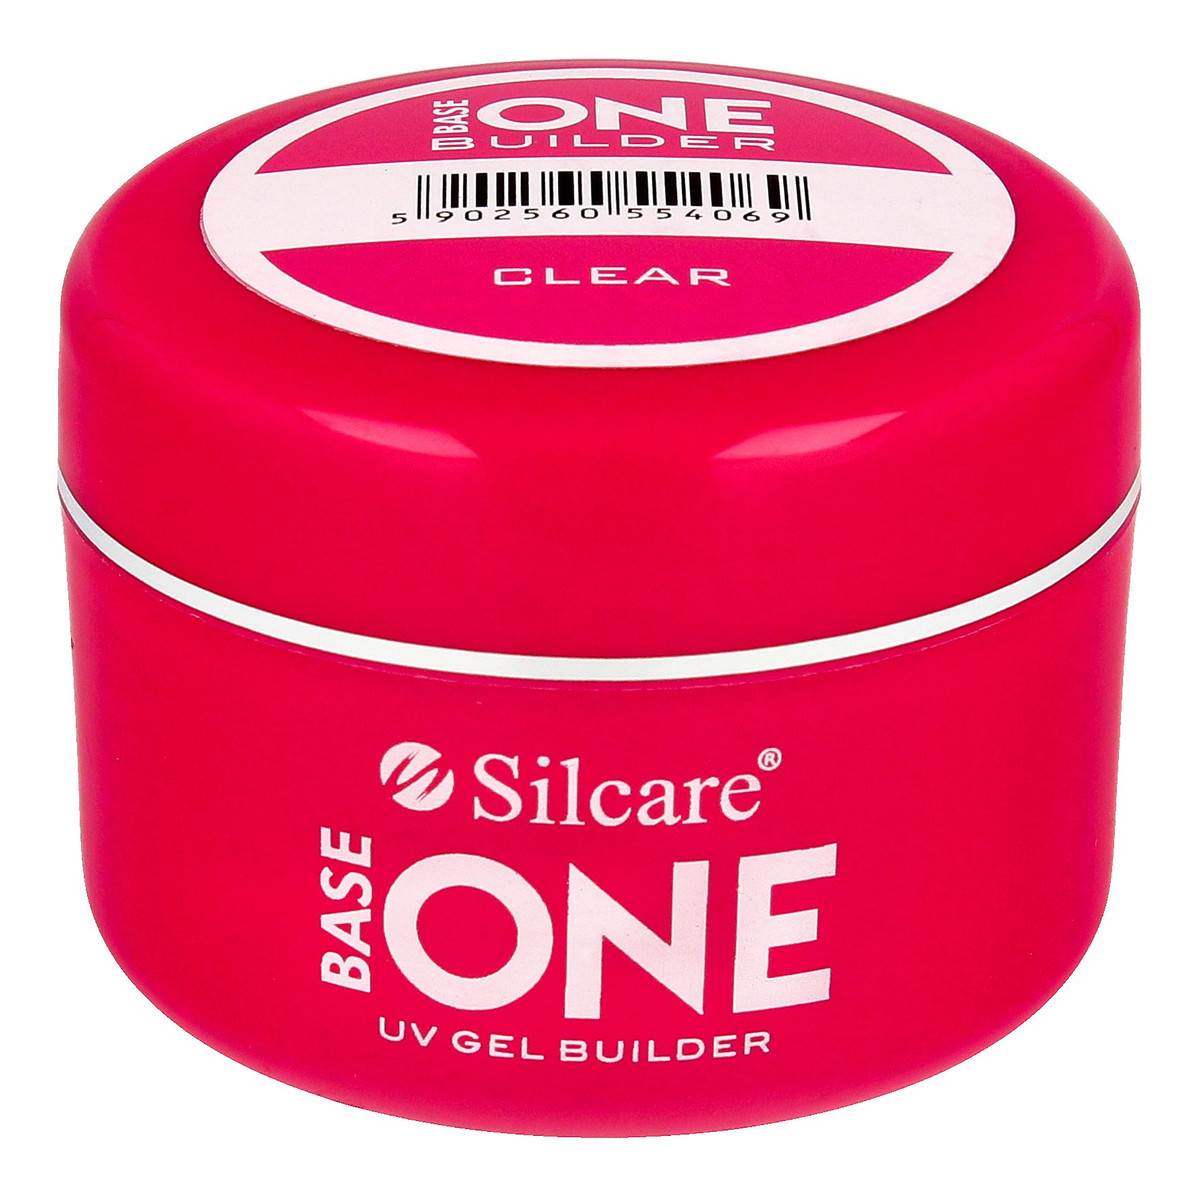 Silcare Silcare base one gel base one clear 100g